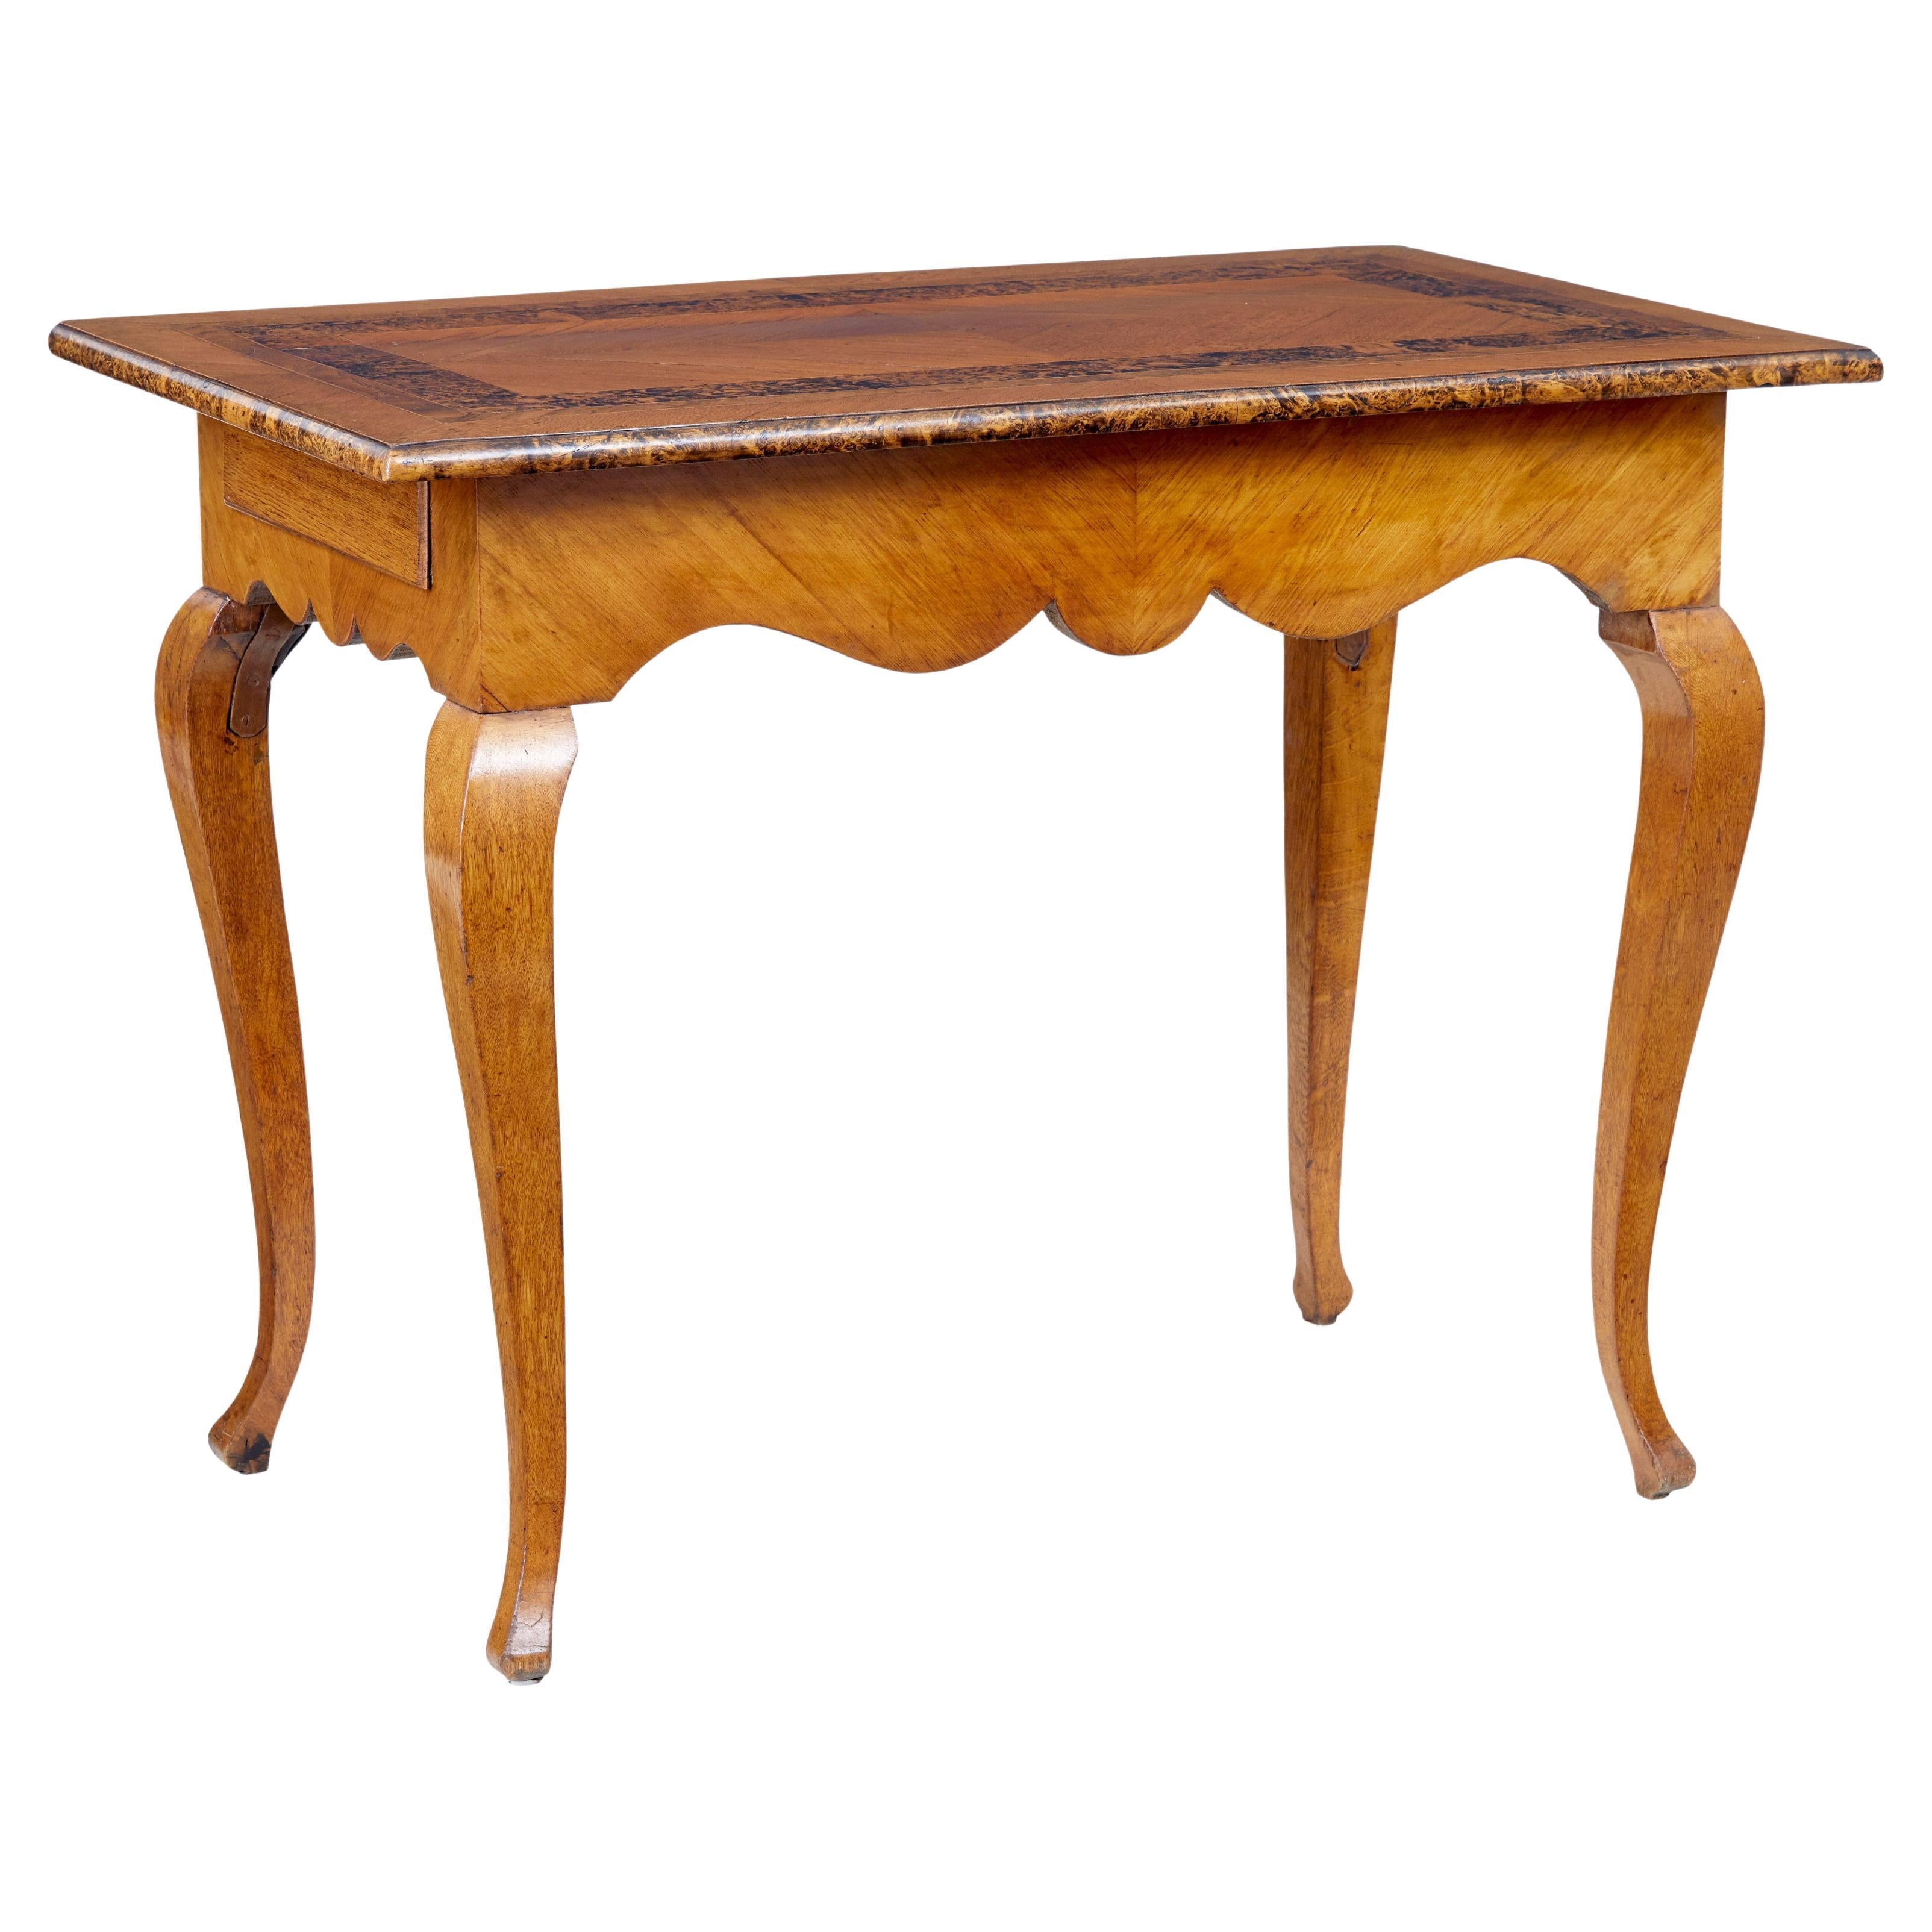 Swedish Mid-19th Century Alder Root Occasional Table For Sale